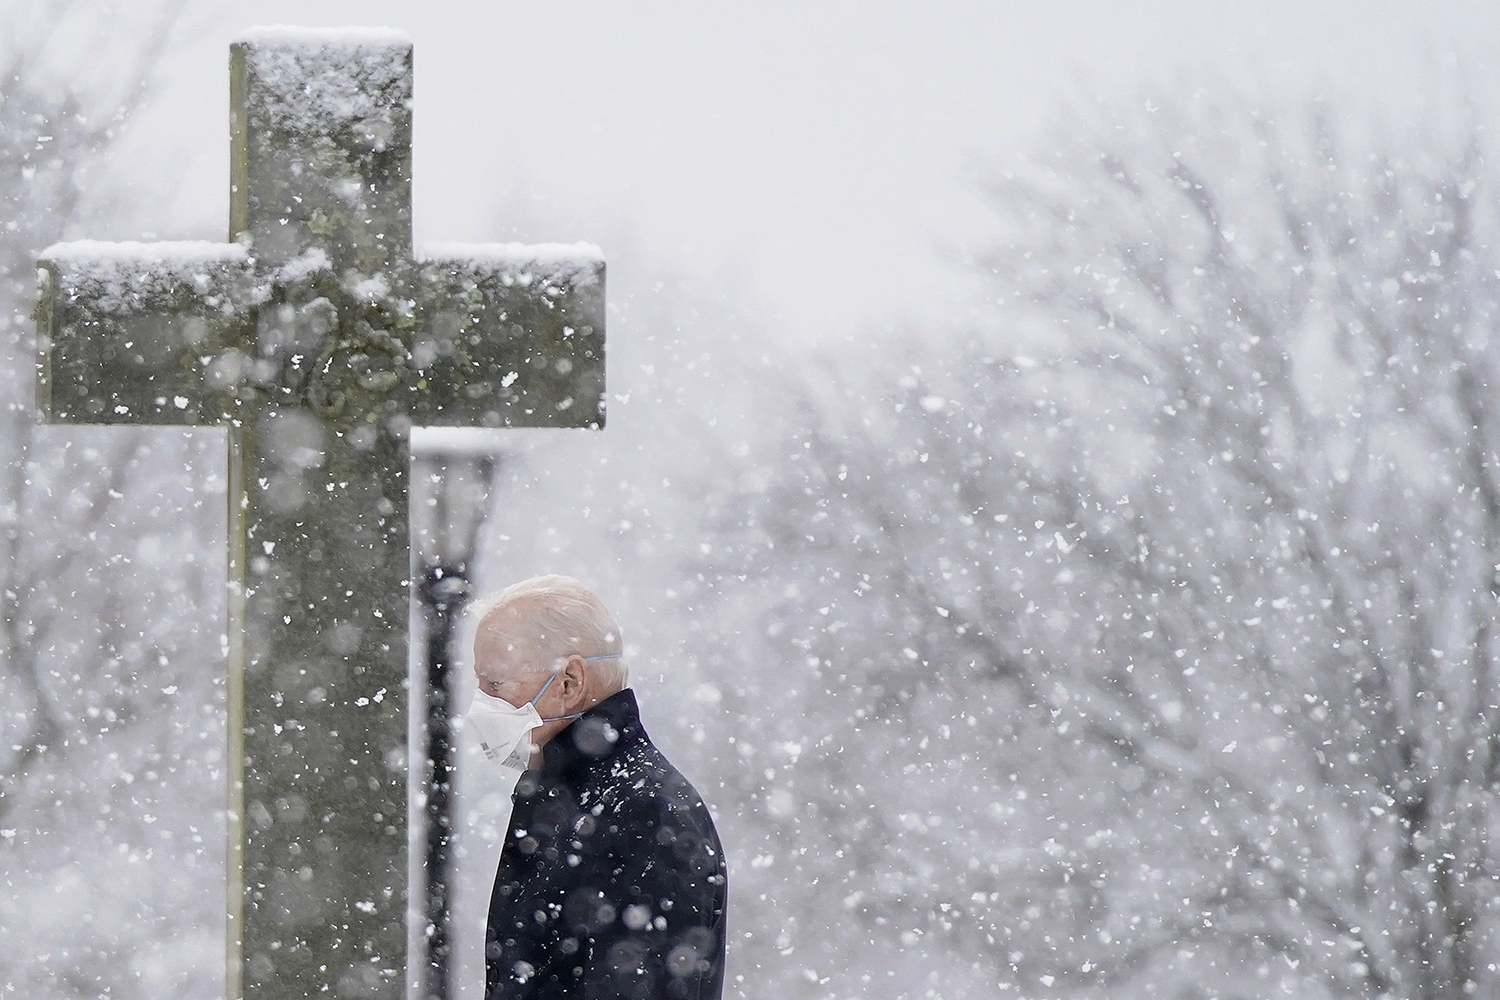 President Joe Biden departs after attending Mass at St. Joseph on the Brandywine Catholic Church as snow falls, Sunday, Feb. 7, 2021, in Wilmington, Del. President Biden is tasked with selecting a new ambassador to the Holy See to recommend to the Senate for confirmation. (AP Photo/Patrick Semansky)